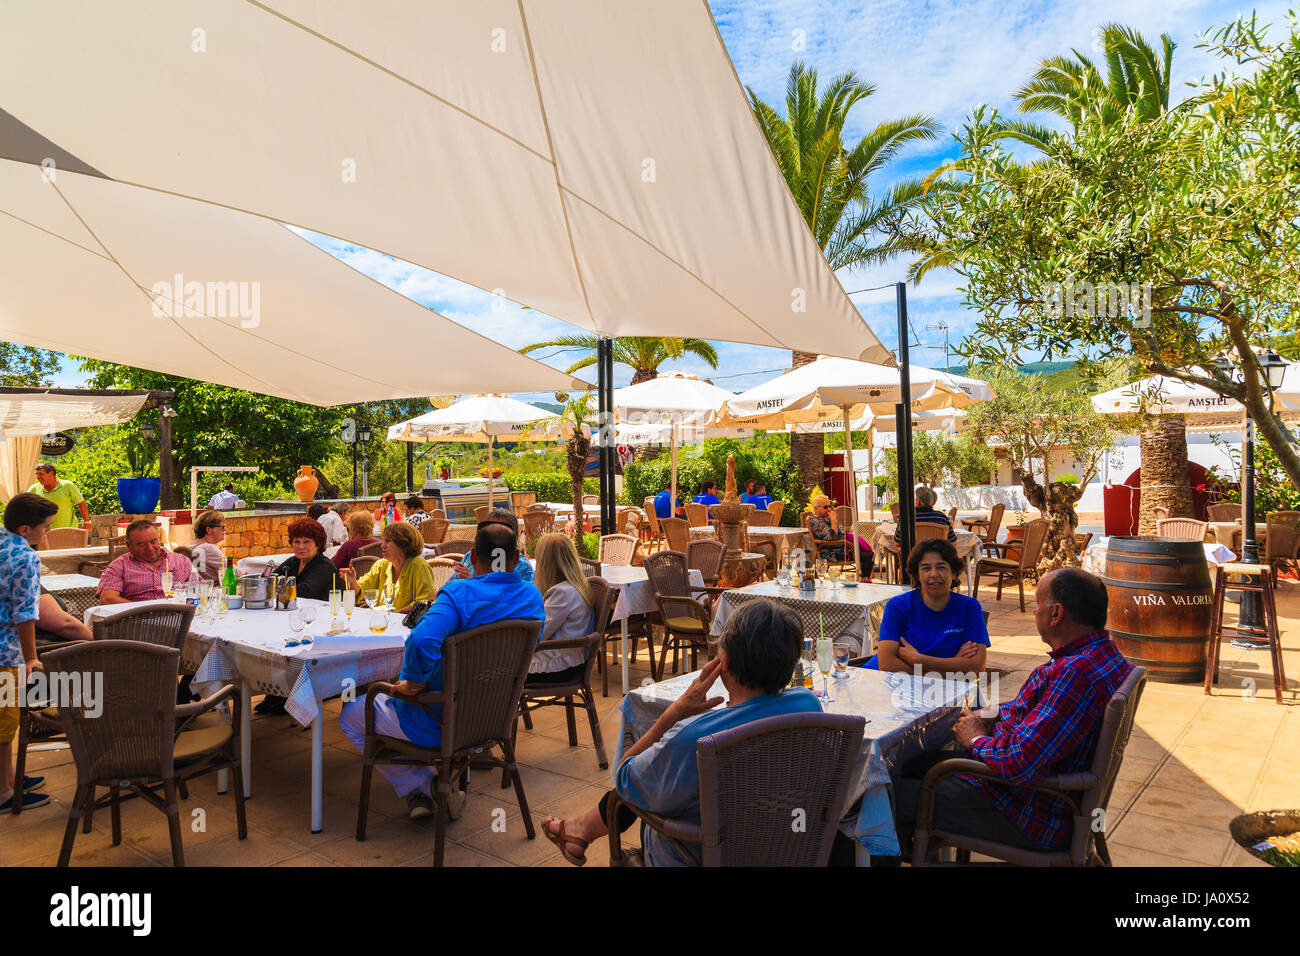 IBIZA ISLAND, SPAIN - MAY 18, 2017: people dining in garden of traditional restaurant on sunny summer day in Sant Carles de Peralta village, Ibiza isl Stock Photo